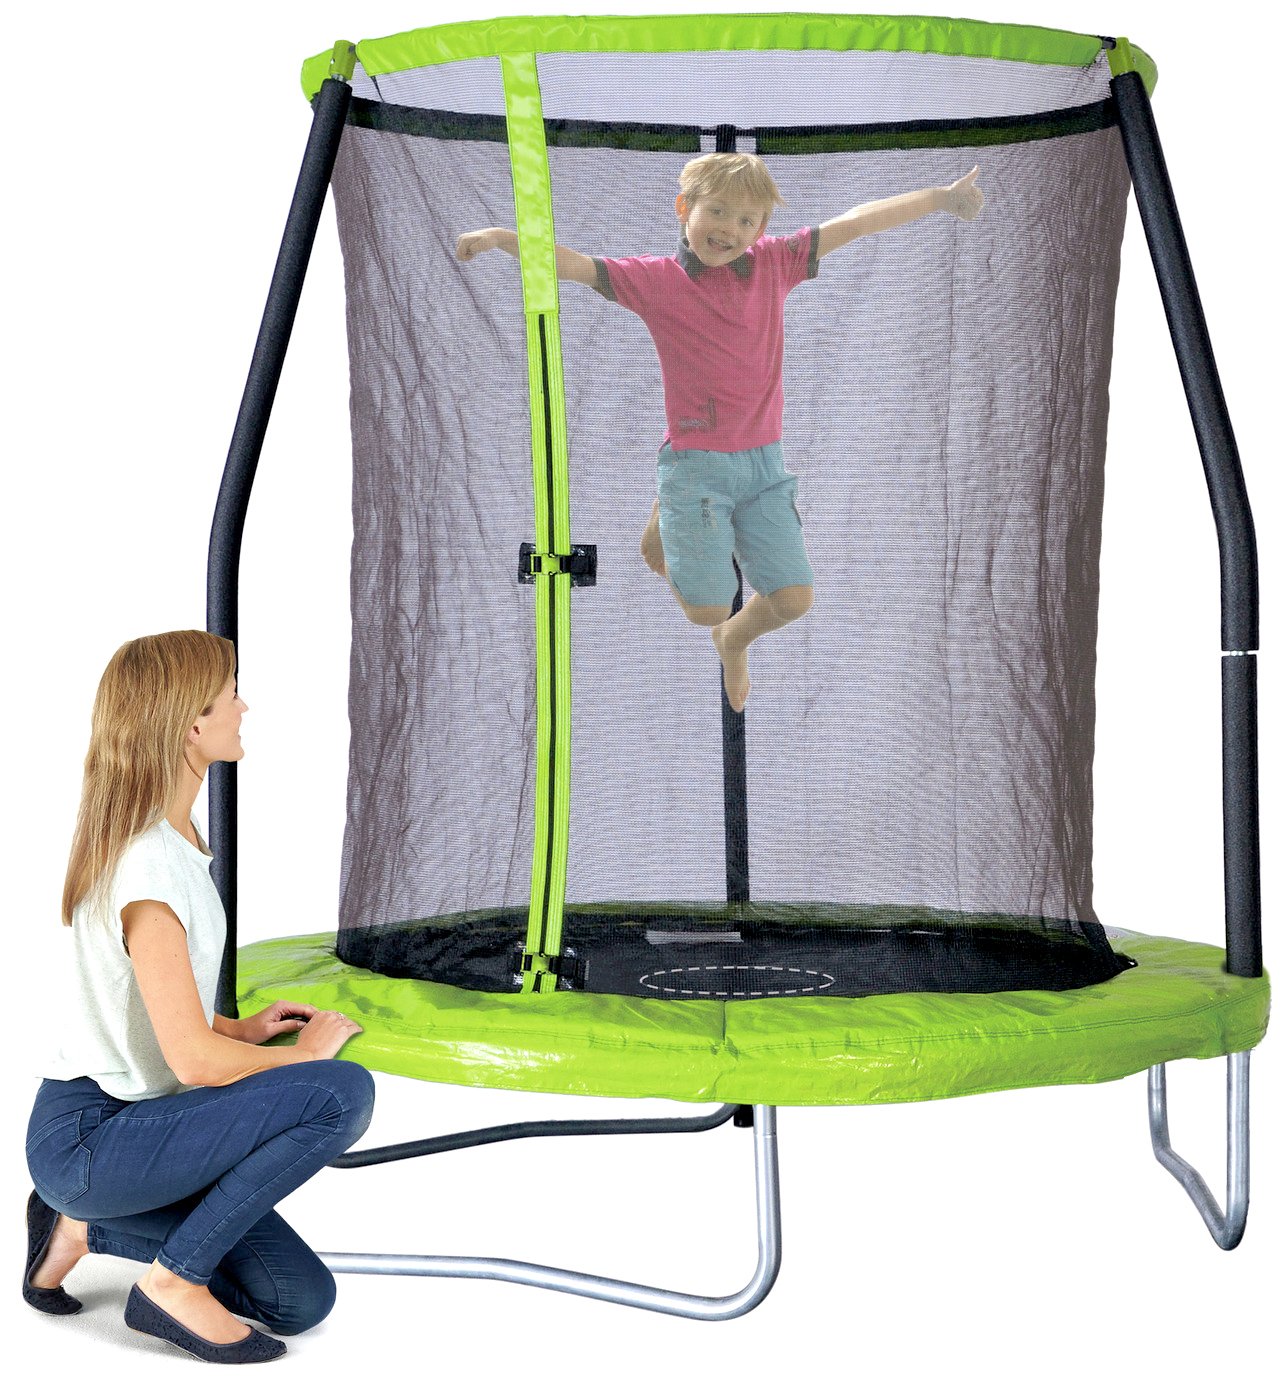 Chad Valley 6ft Outdoor Kids Trampoline with Enclosure Review